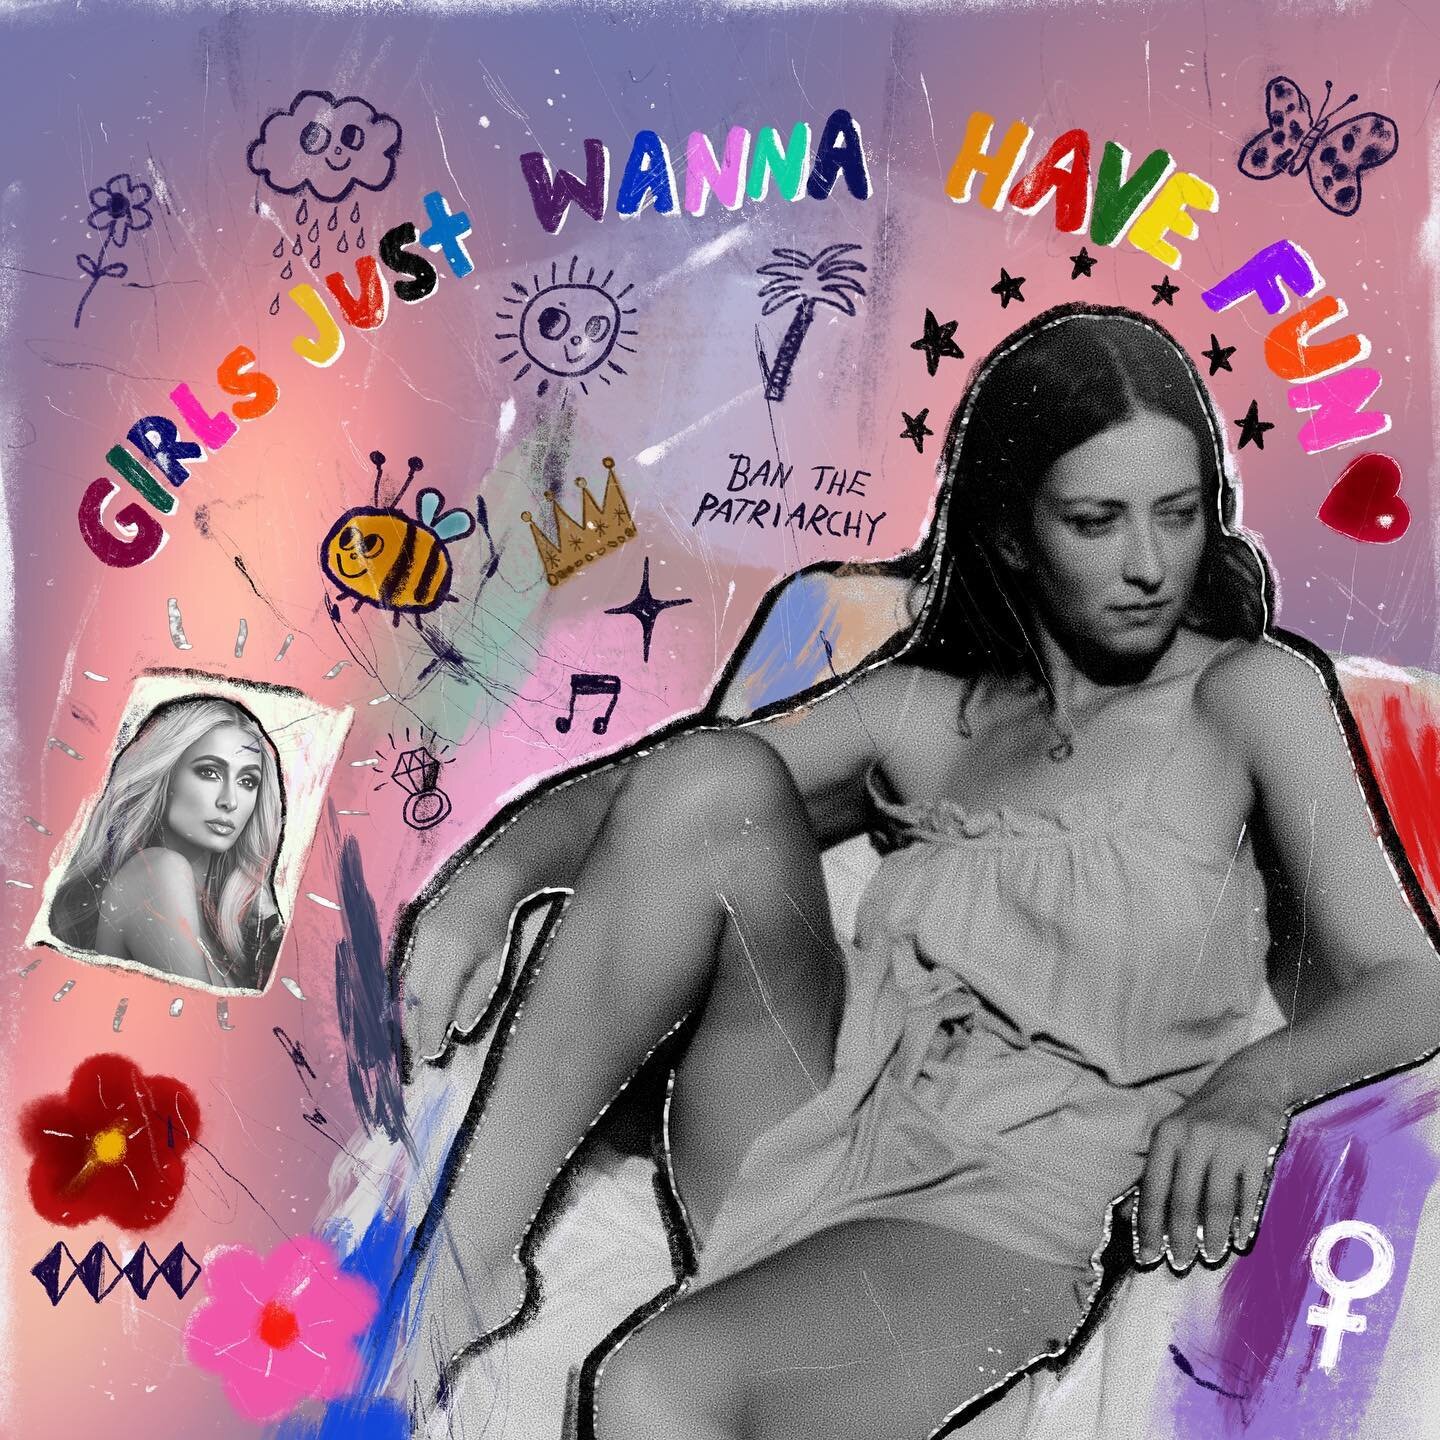 ✨New Lyric Video✨by @xshandanx is now Live on my YouTube channel. Link in bio ✨ Thankyou 💕@iscreamcolour for this cool artwork! #girlsjustwanttohavefun #frallymusic #parishilton #thisisparis #cyndilauper